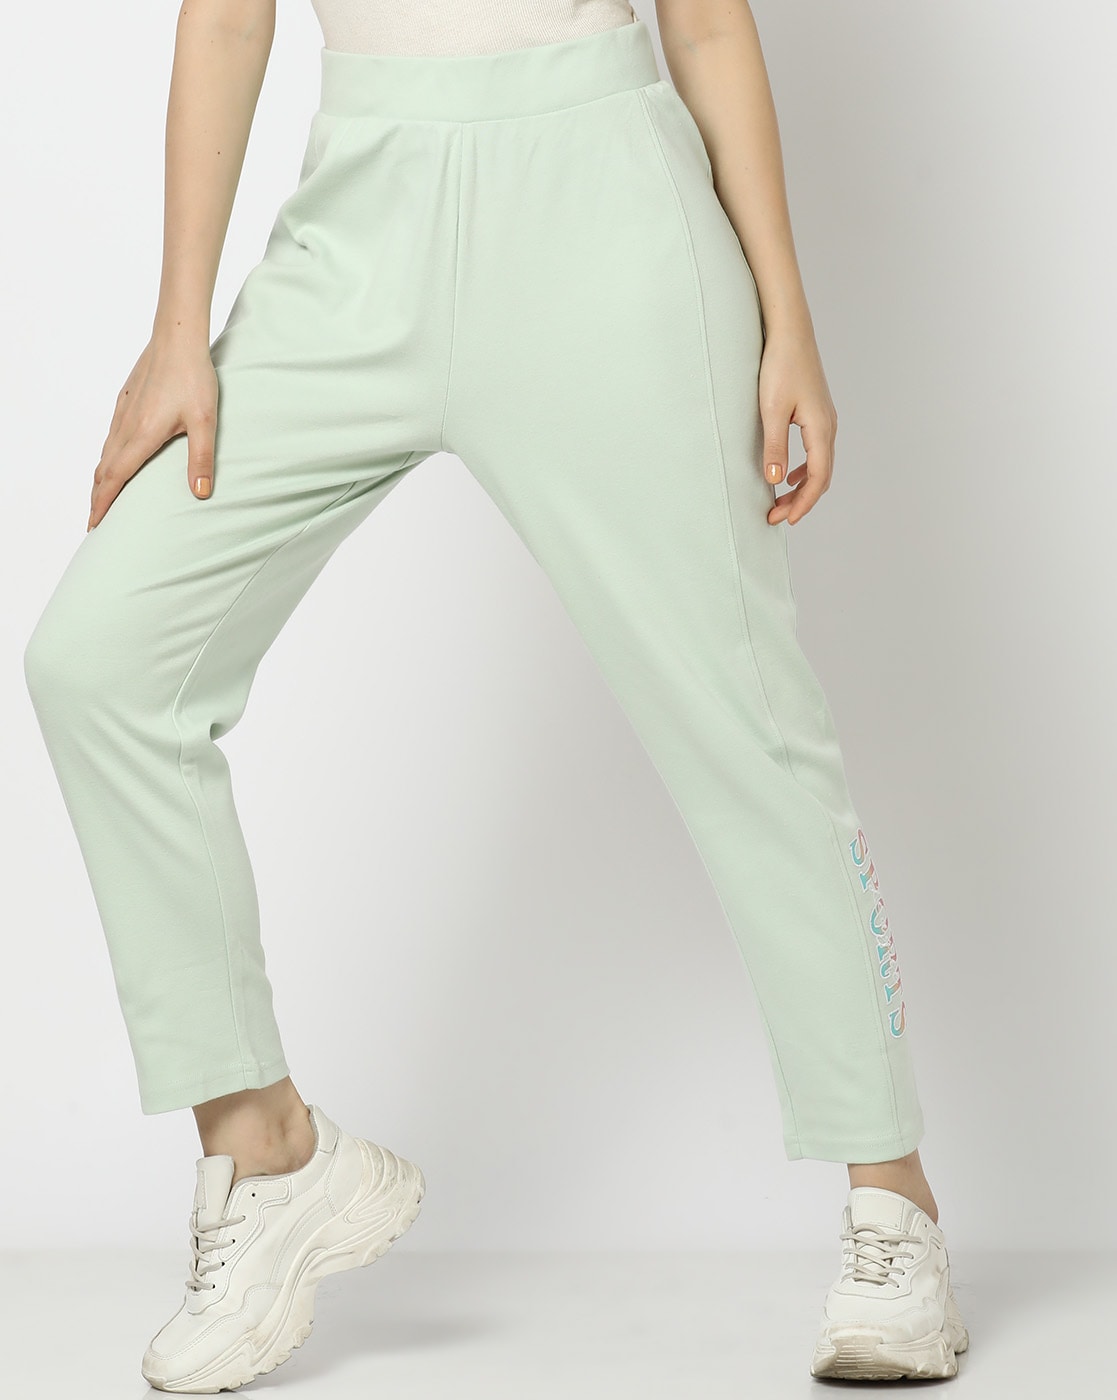 Buy White Track Pants for Women by Teamspirit Online | Ajio.com